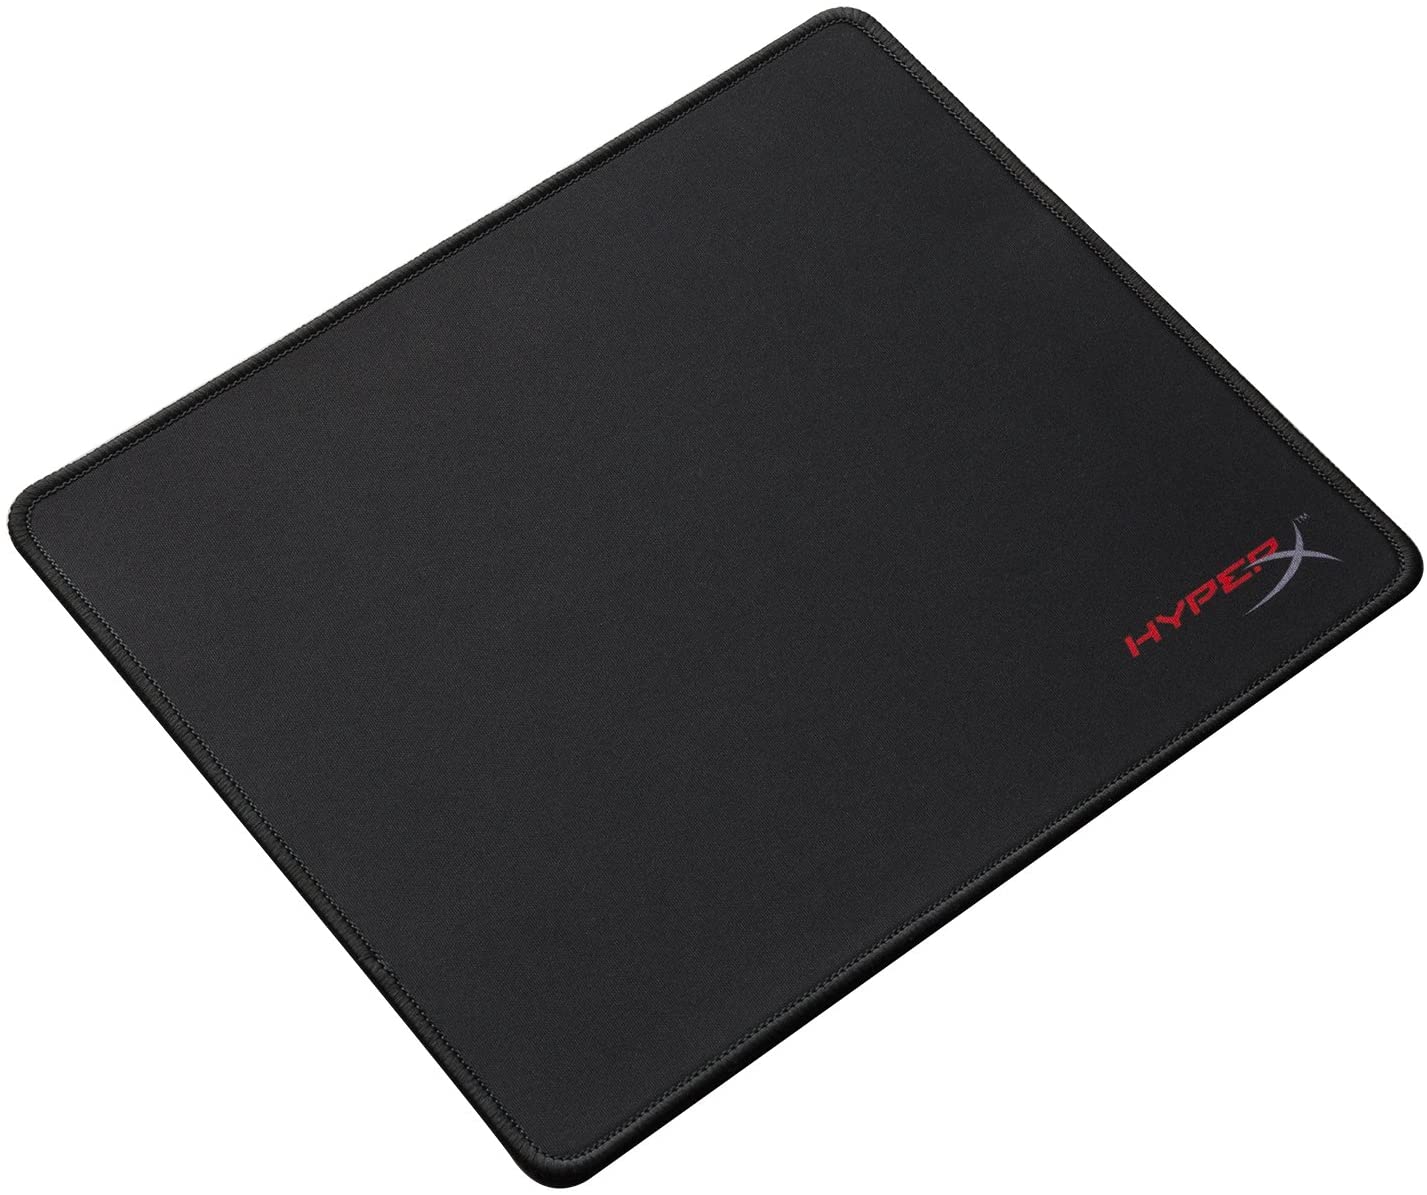 HyperX FURY S - Pro Gaming Mouse Pad, Cloth Surface Optimized for Precision, Stitched Anti-Fray Edges, Small 290x240x3mm - Pro-Distributing